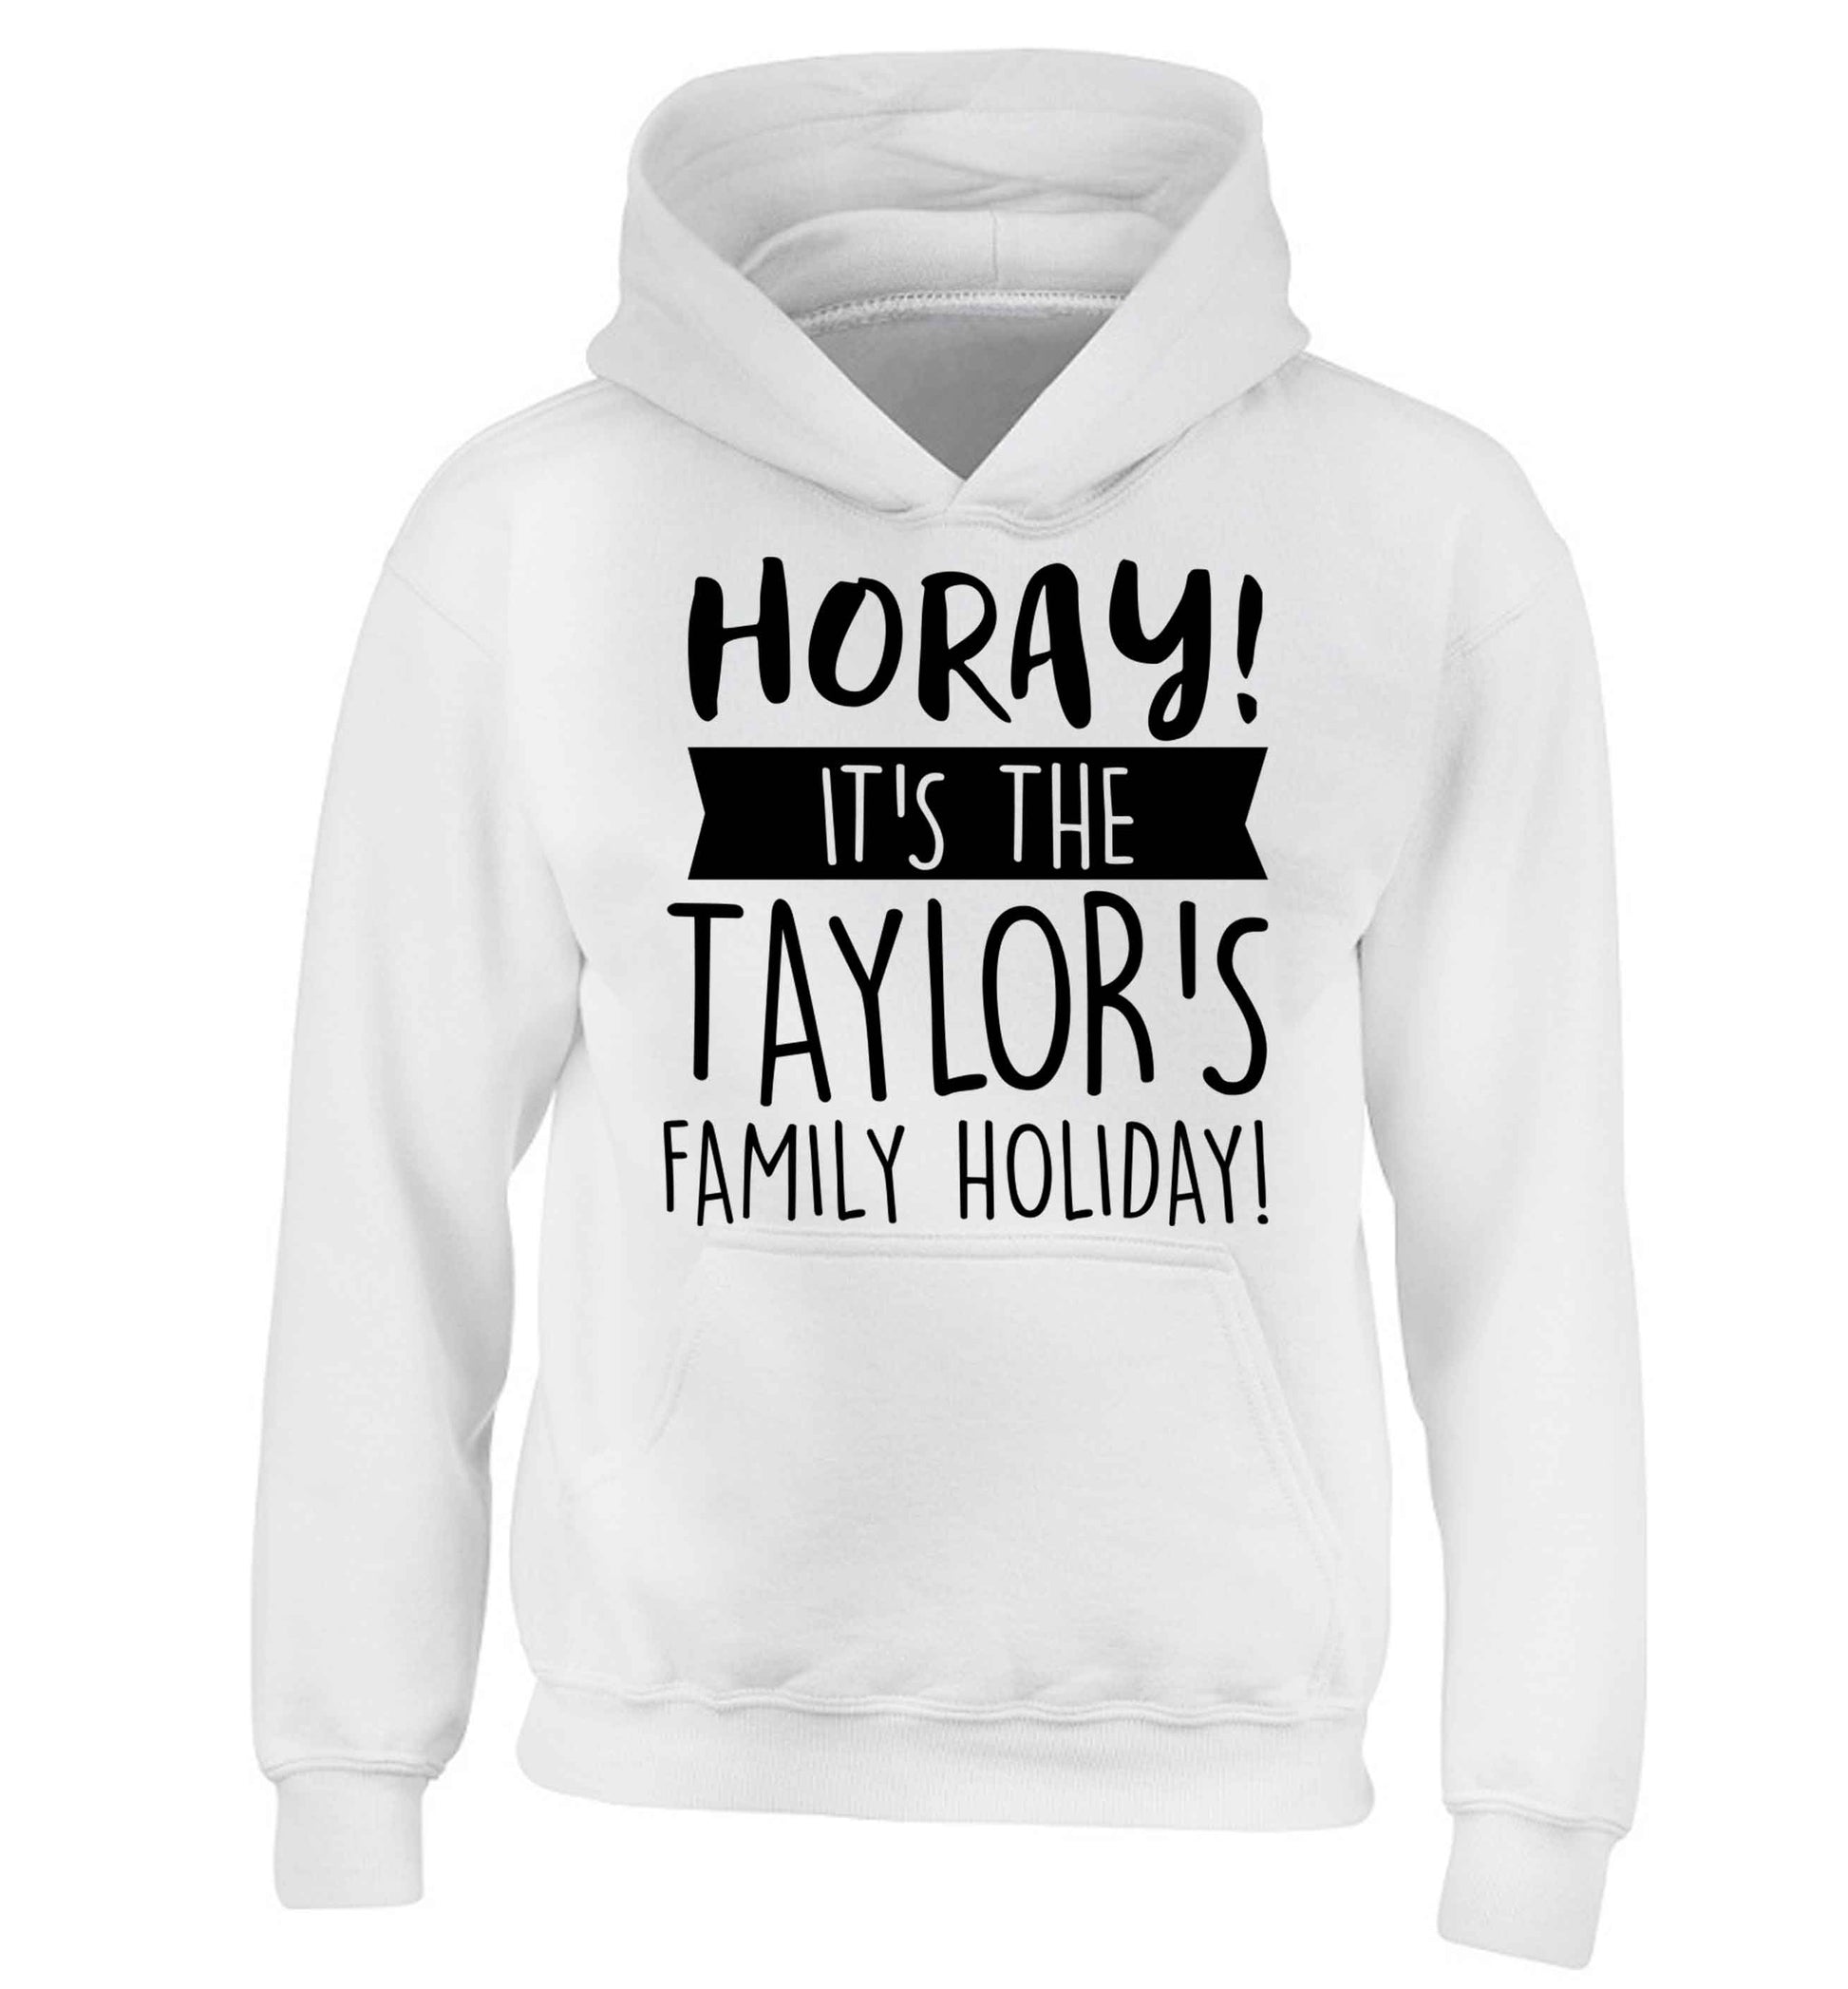 Horay it's the Taylor's family holiday! personalised item children's white hoodie 12-13 Years